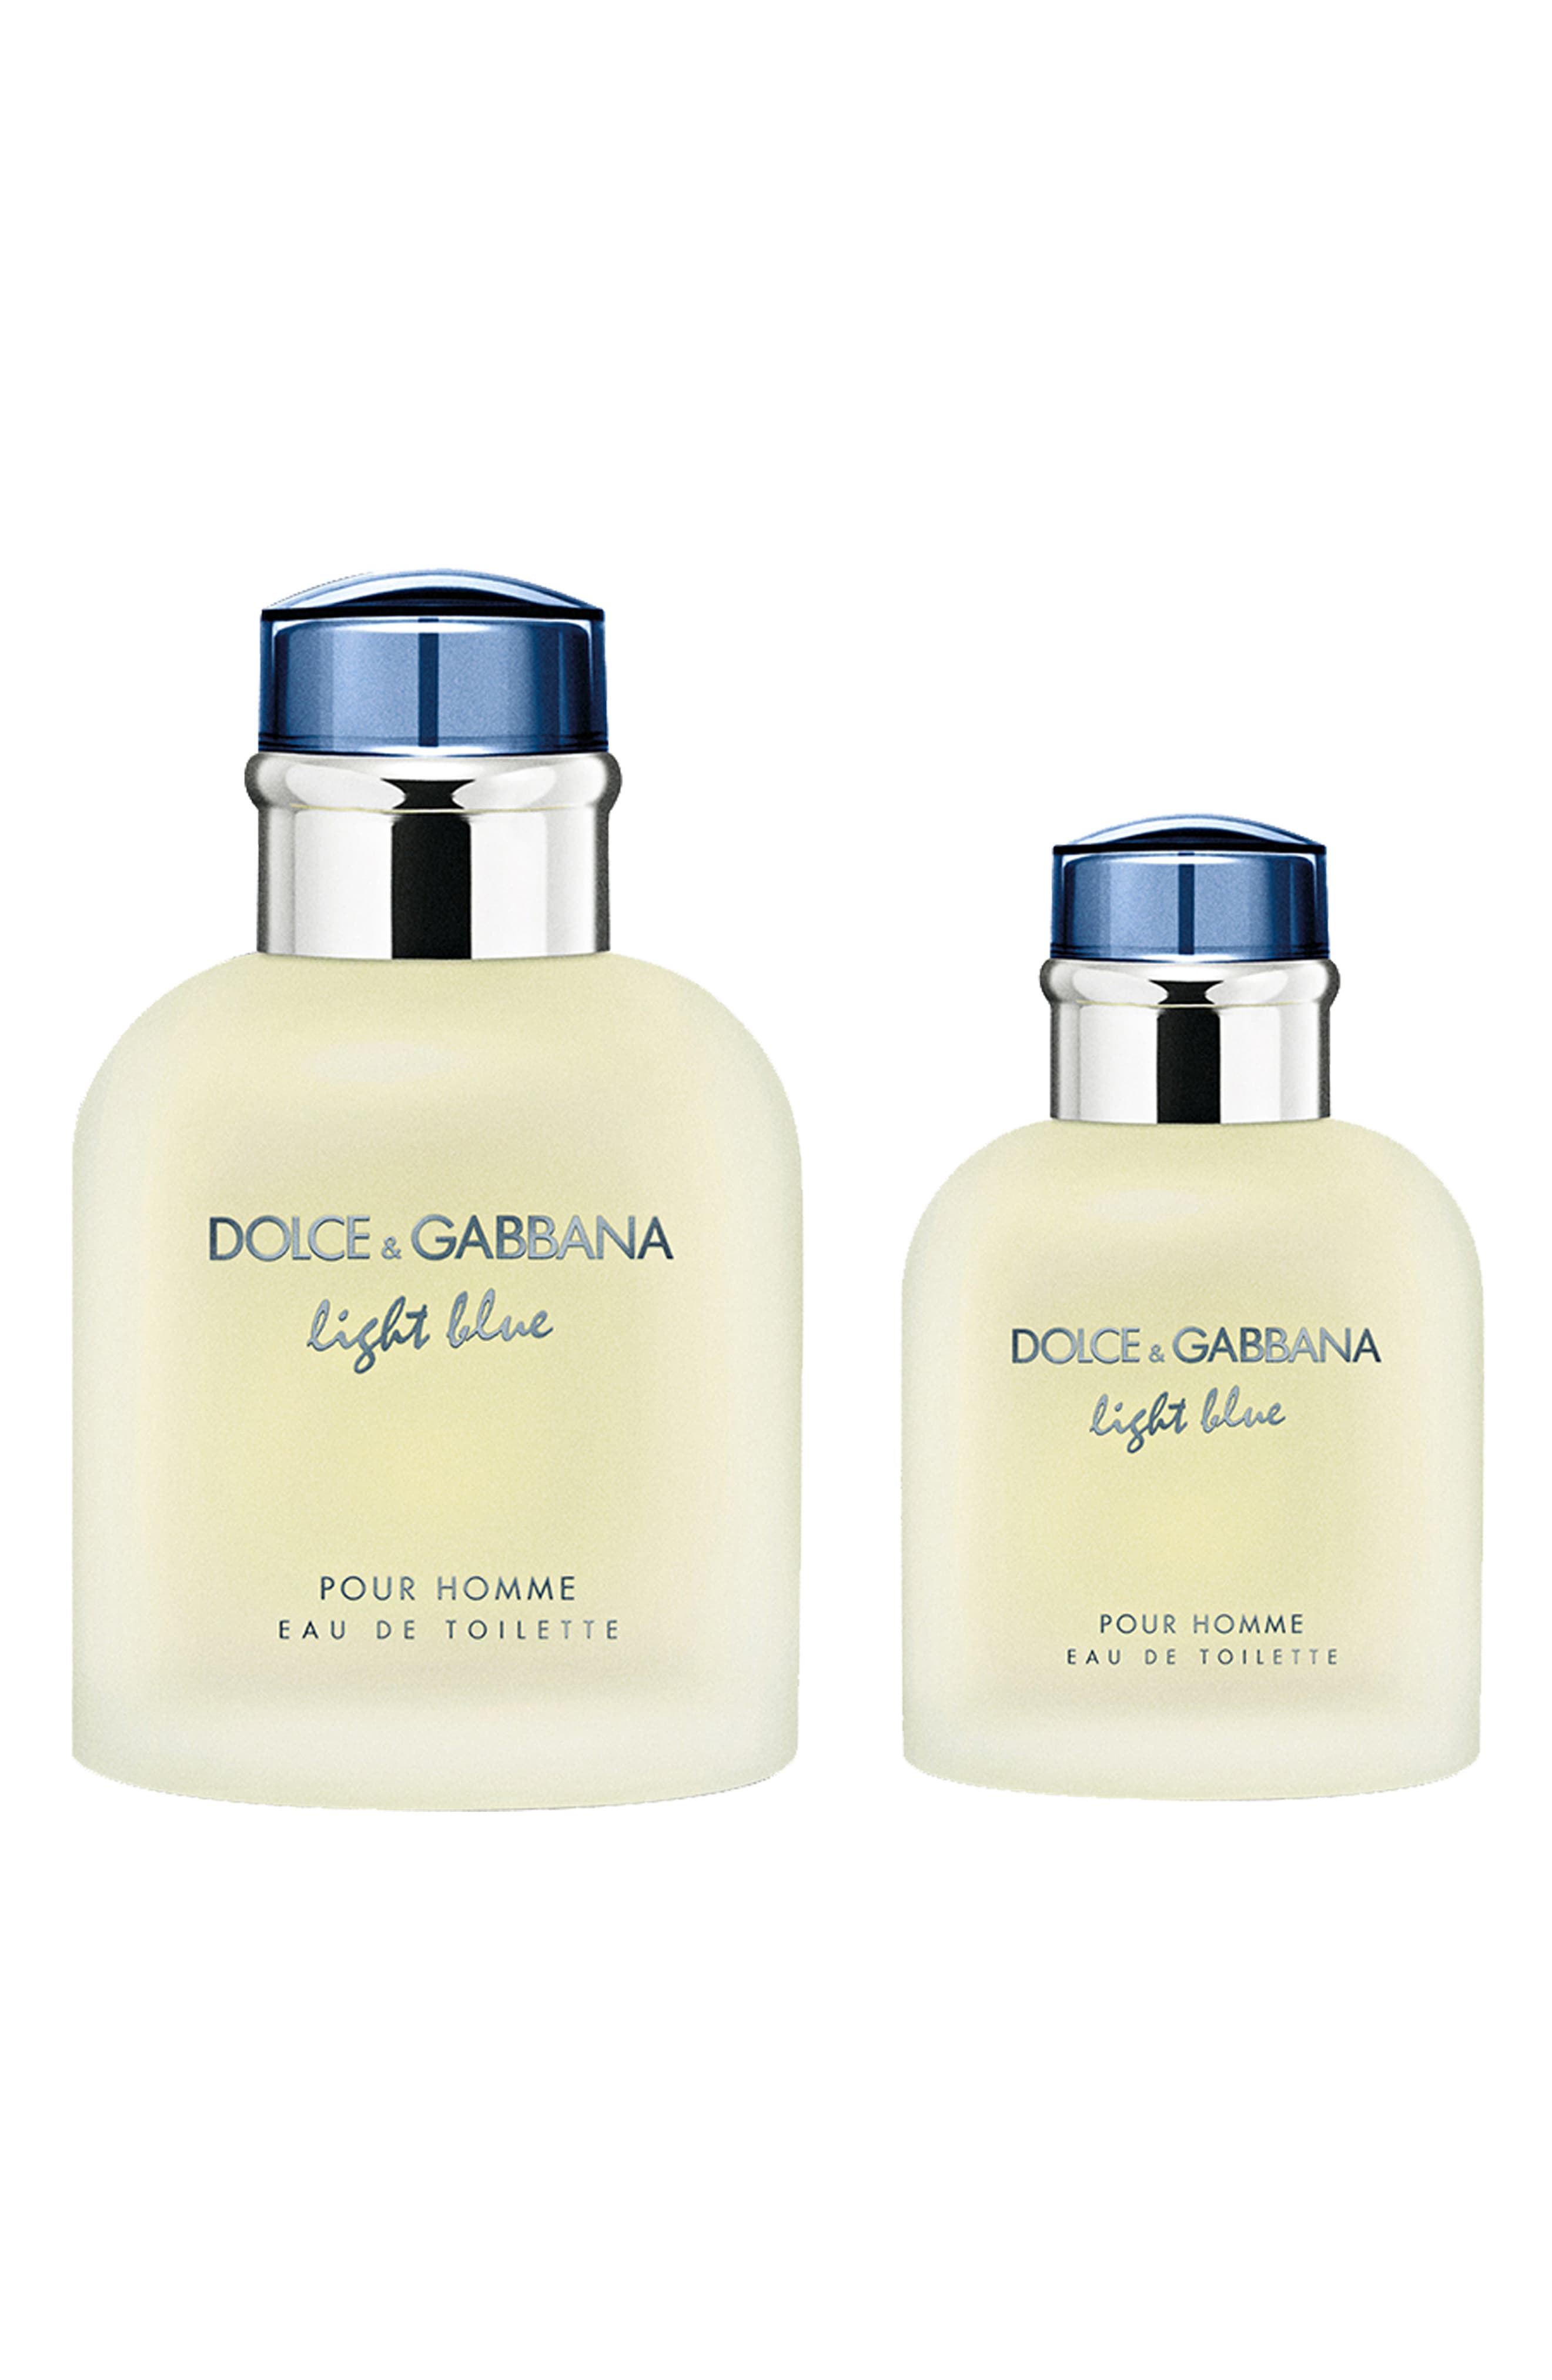 Dolce gabbana forever pour homme. Dolce Gabbana Light Blue pour homme. Dolce Gabbana Light Blue pour homme Eau de Toilette. Dolce & Gabbana Light Blue pour homme EDT, 125 ml. Dolce Gabbana Light Blue набор.